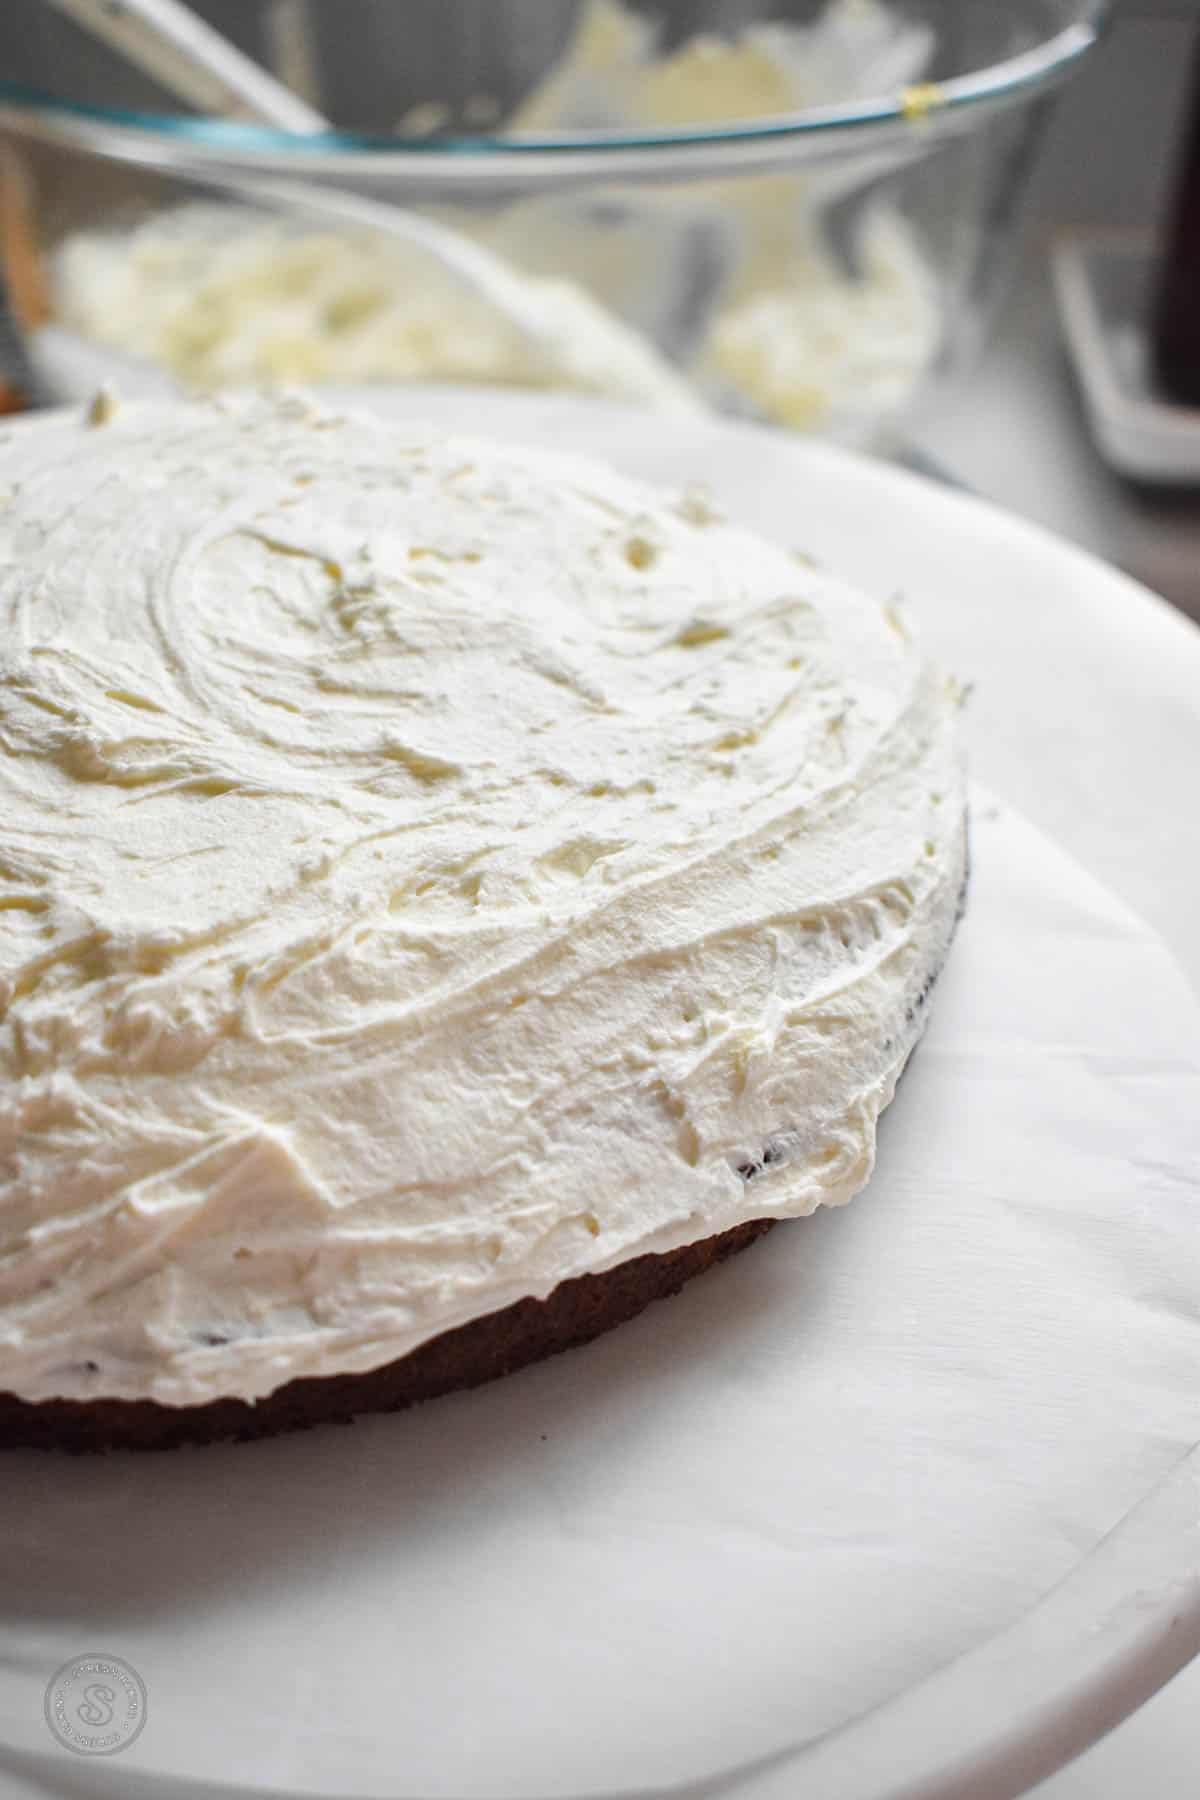 Whipped cream frosting spread across a round cake layer